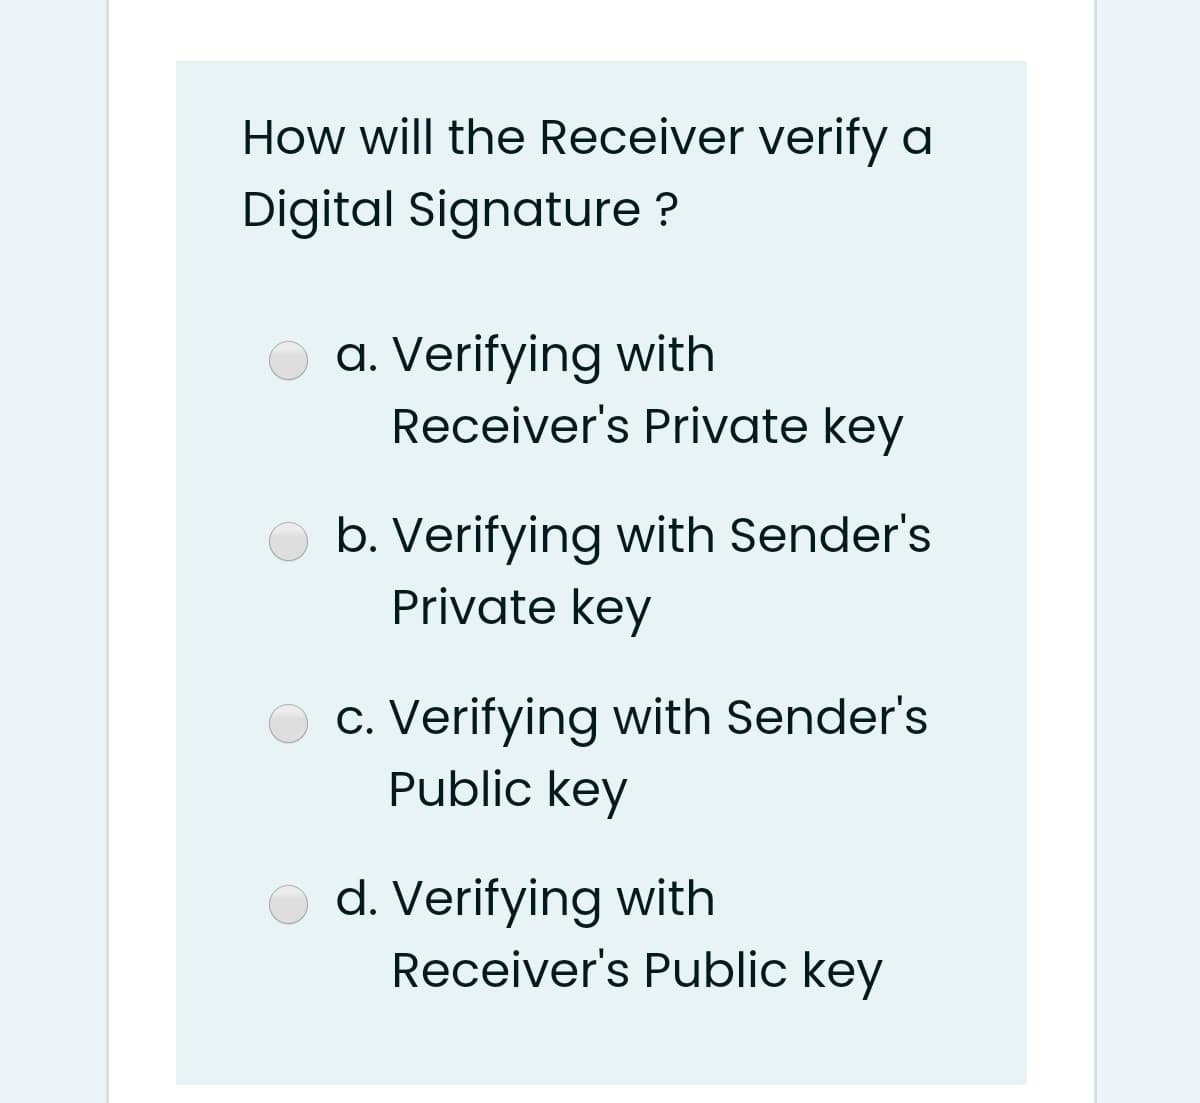 How will the Receiver verify a
Digital Signature ?
a. Verifying with
Receiver's Private key
b. Verifying with Sender's
Private key
c. Verifying with Sender's
Public key
d. Verifying with
Receiver's Public key
